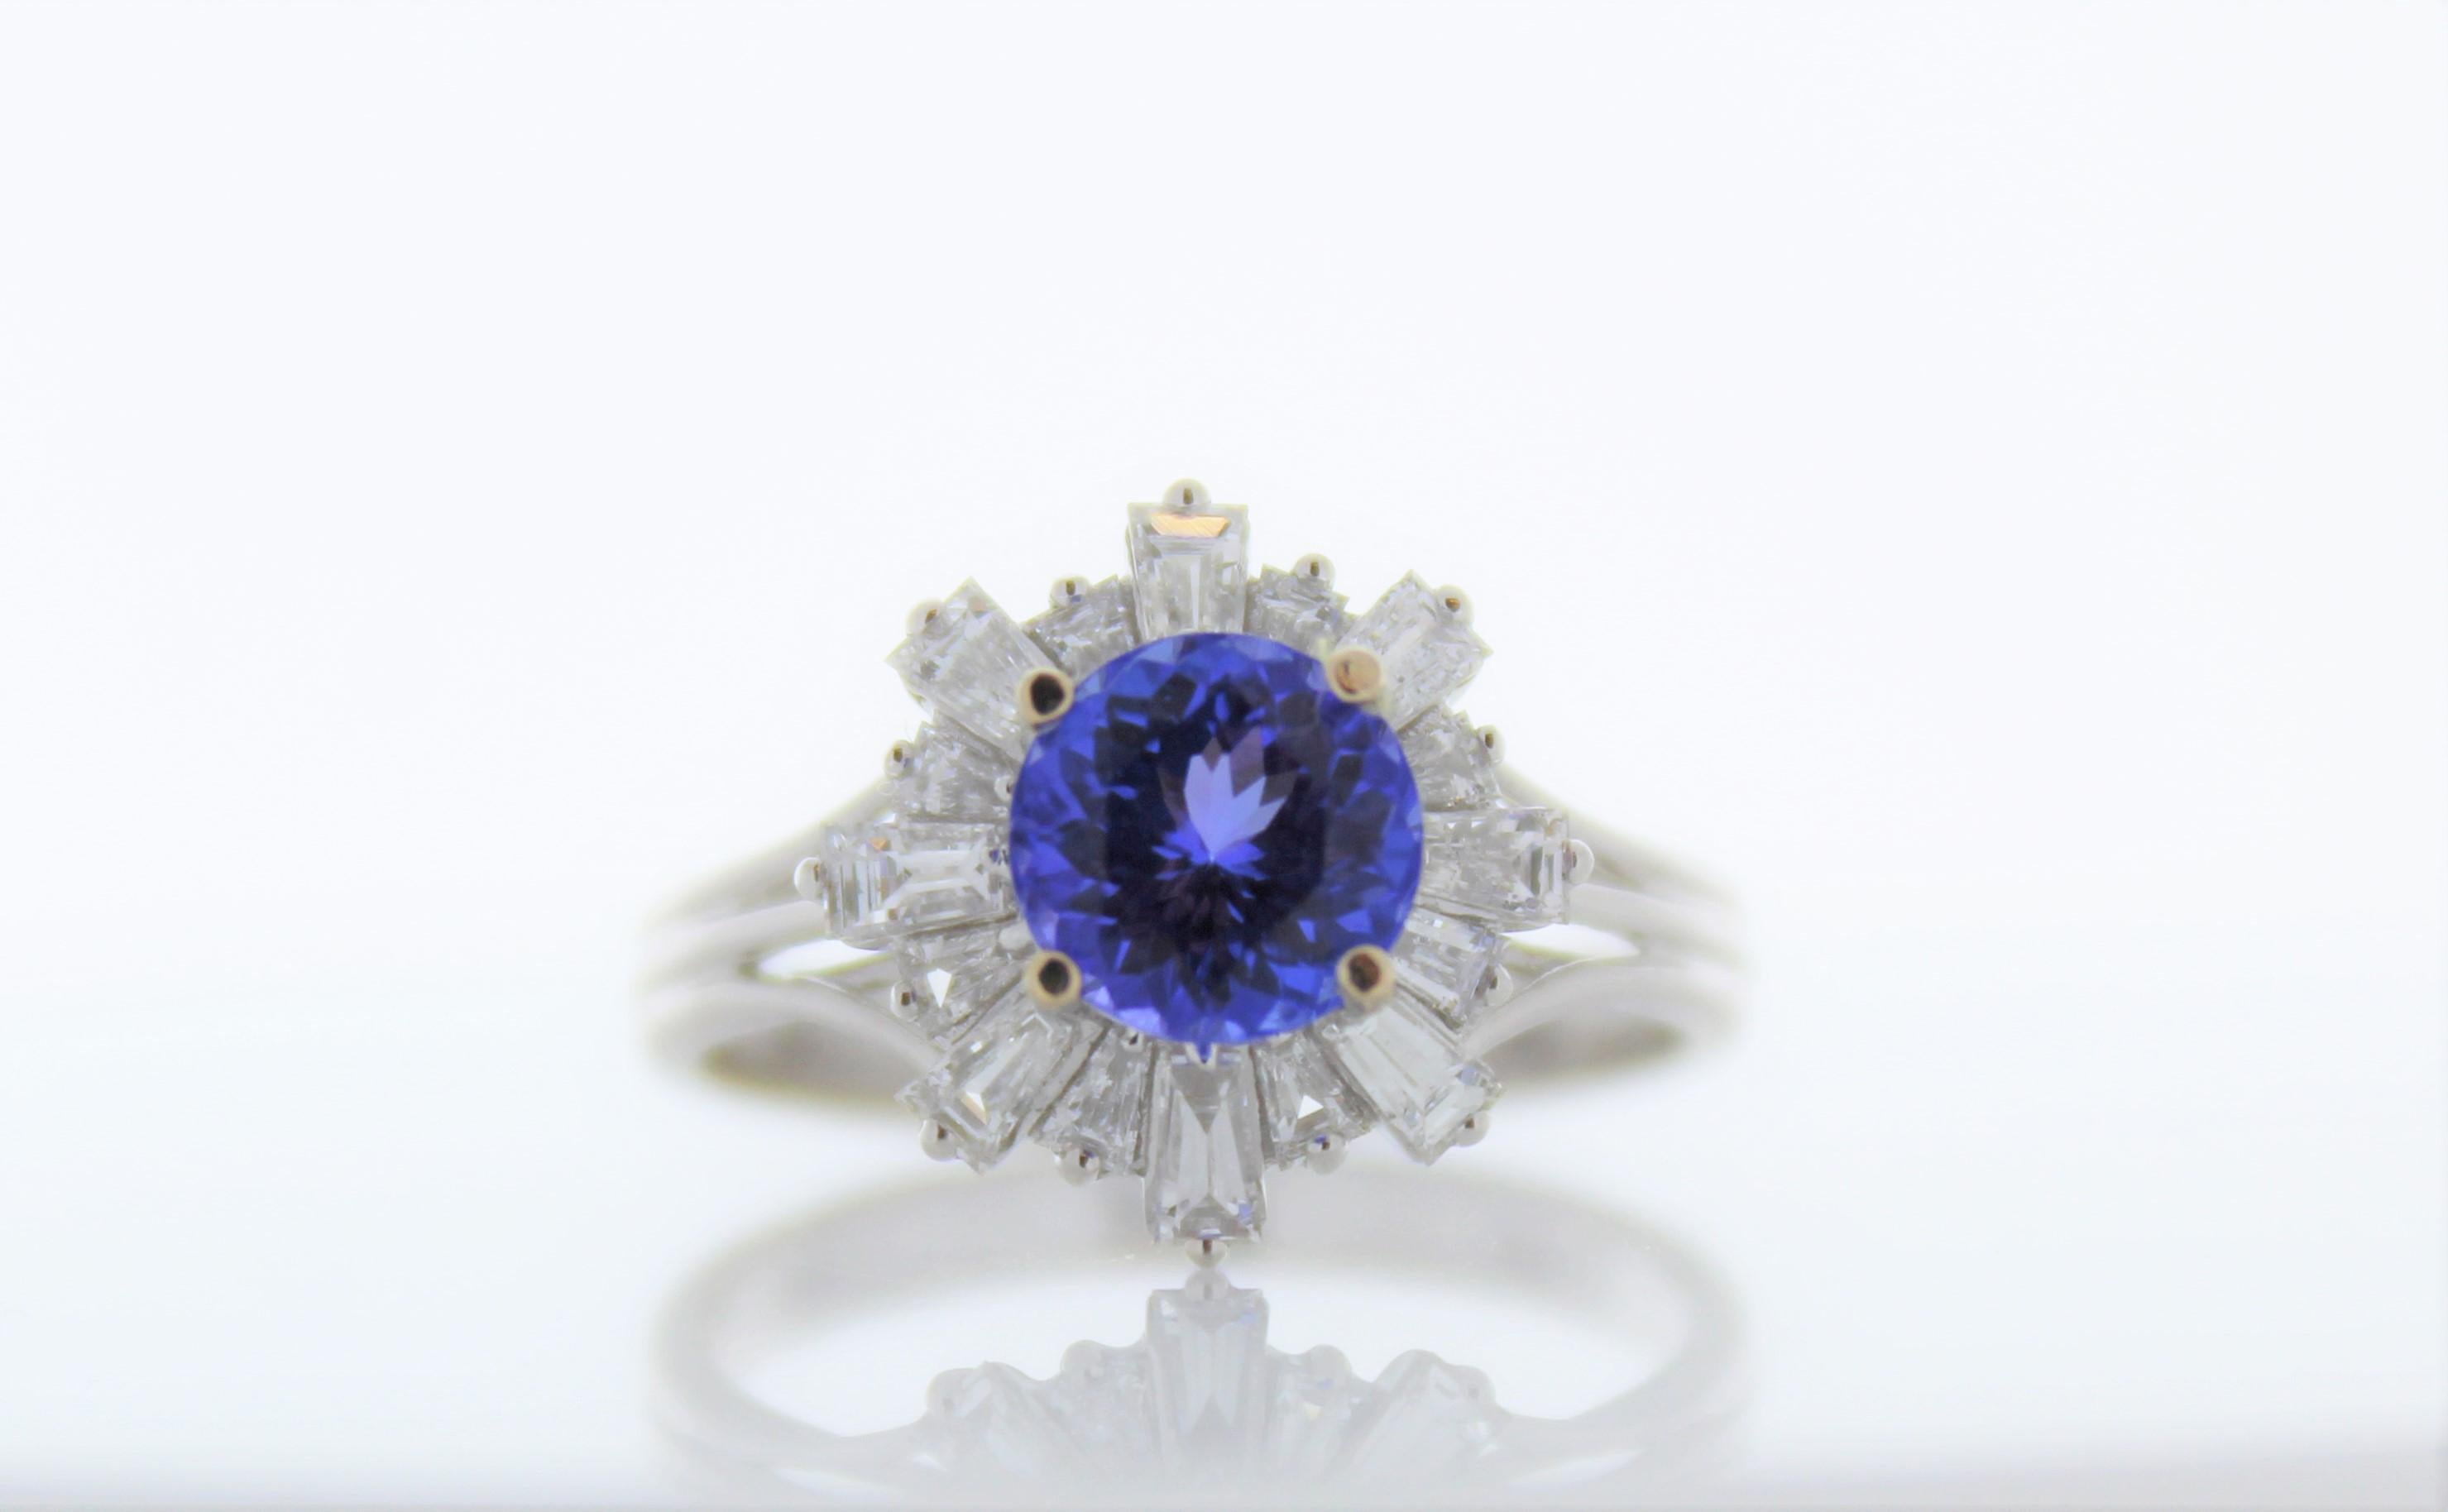 This is a cocktail ring that showcases a 1.38 carat cushion cut tanzanite. It has diamonds around the gemstone totaling .57 carats. Designed in brightly polished platinum, this gorgeous ring exudes sophistication and individual style.